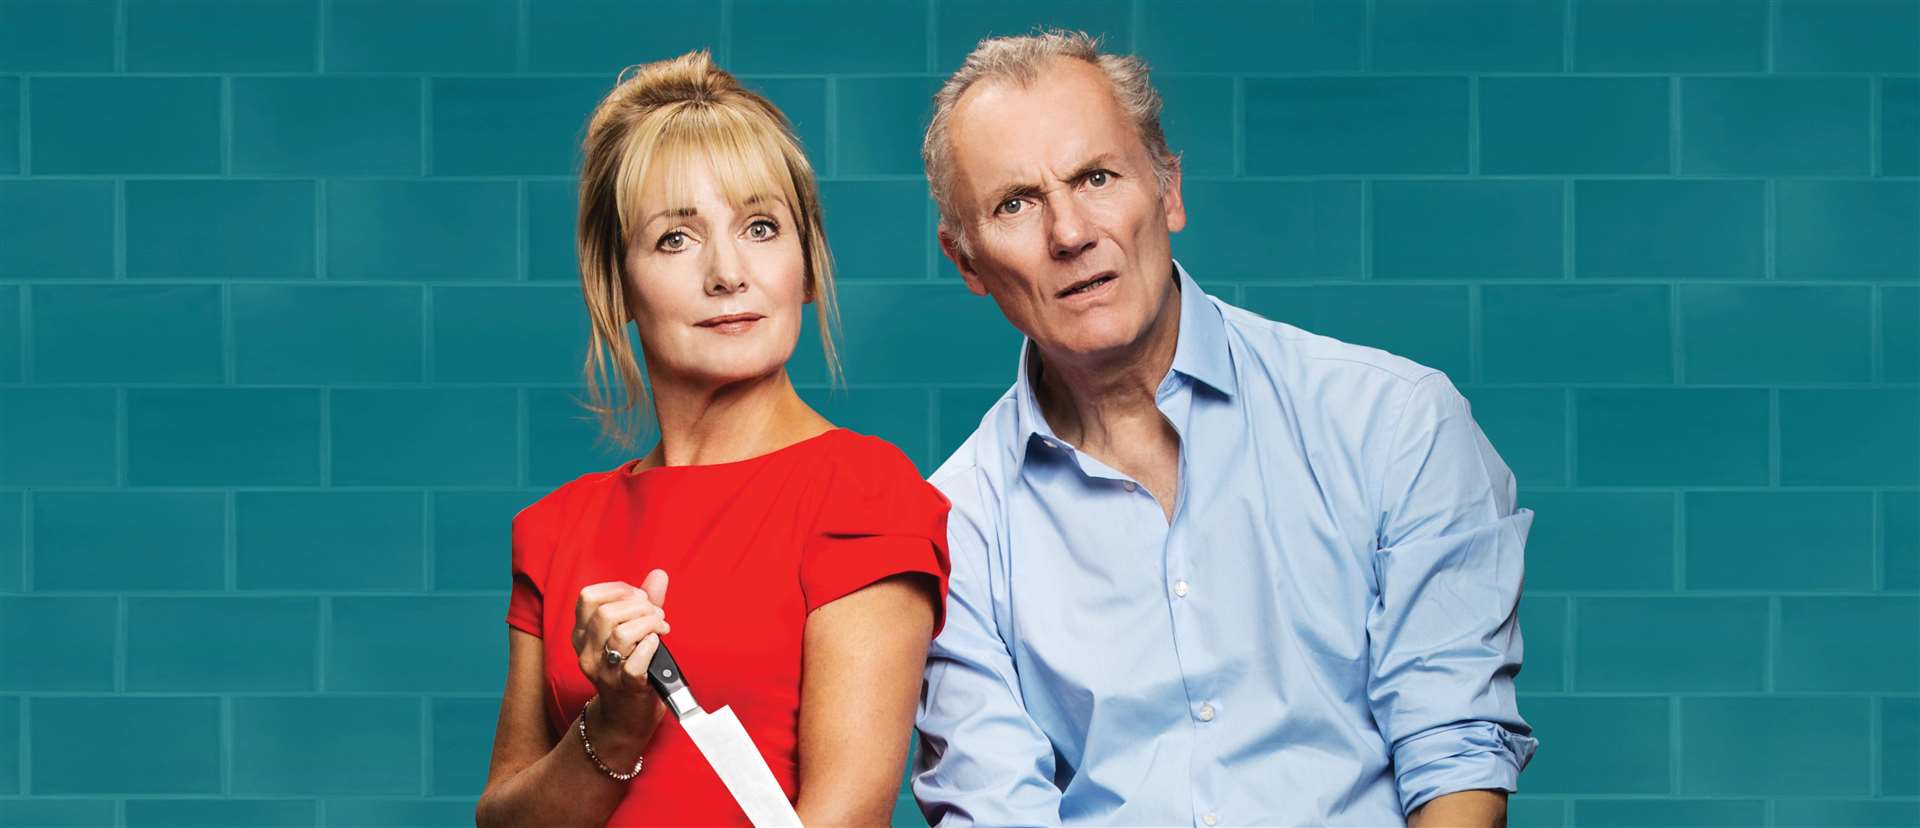 Caroline's Kitchen is coming to the Assembly Hall Theatre in Tunbridge Wells